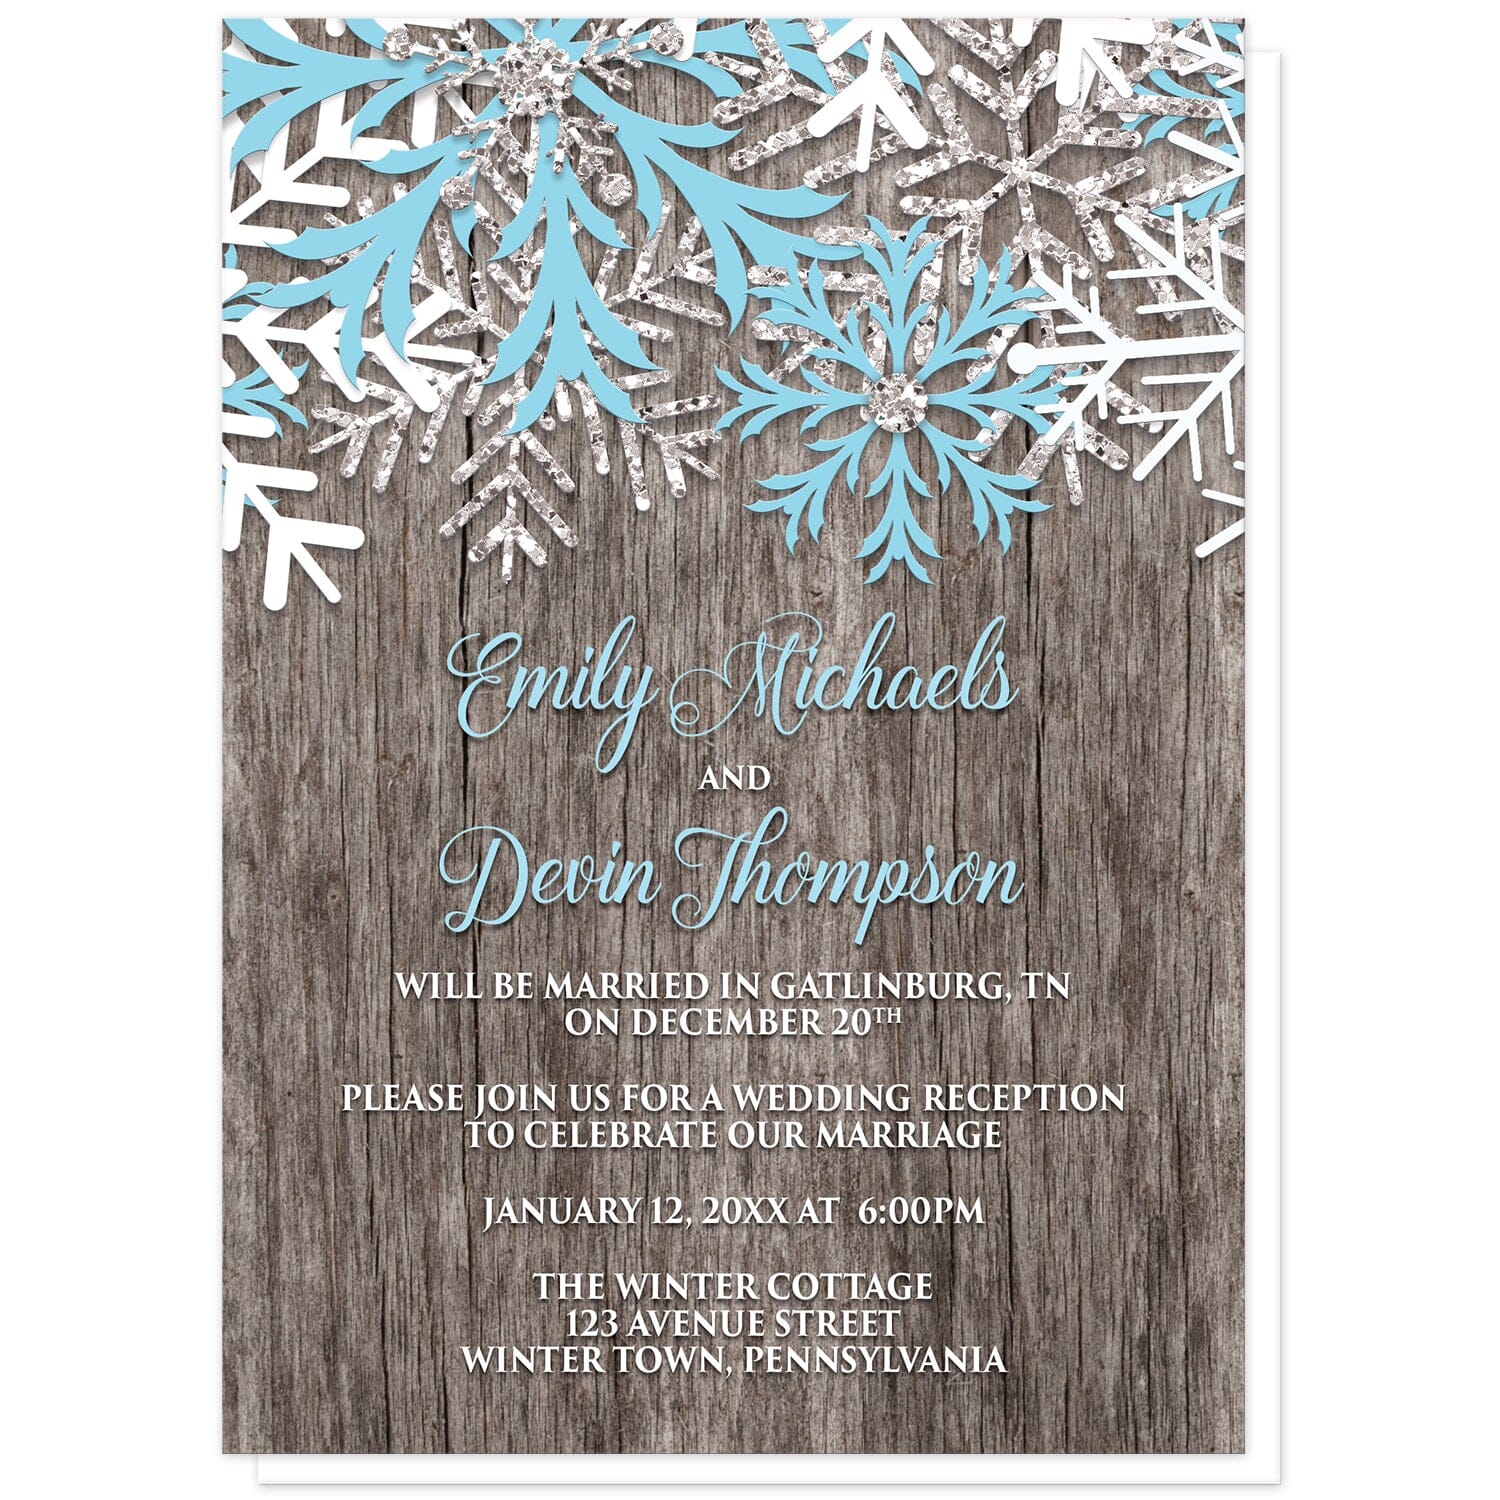 Rustic Winter Wood Blue Snowflake Reception Only Invitations at Artistically Invited. Country-inspired rustic winter wood blue snowflake reception only invitations designed with light blue, white, and silver-colored glitter-illustrated snowflakes along the top over a rustic wood pattern illustration. Your personalized post-wedding reception details are custom printed in light blue and white over the wood background below the snowflakes.